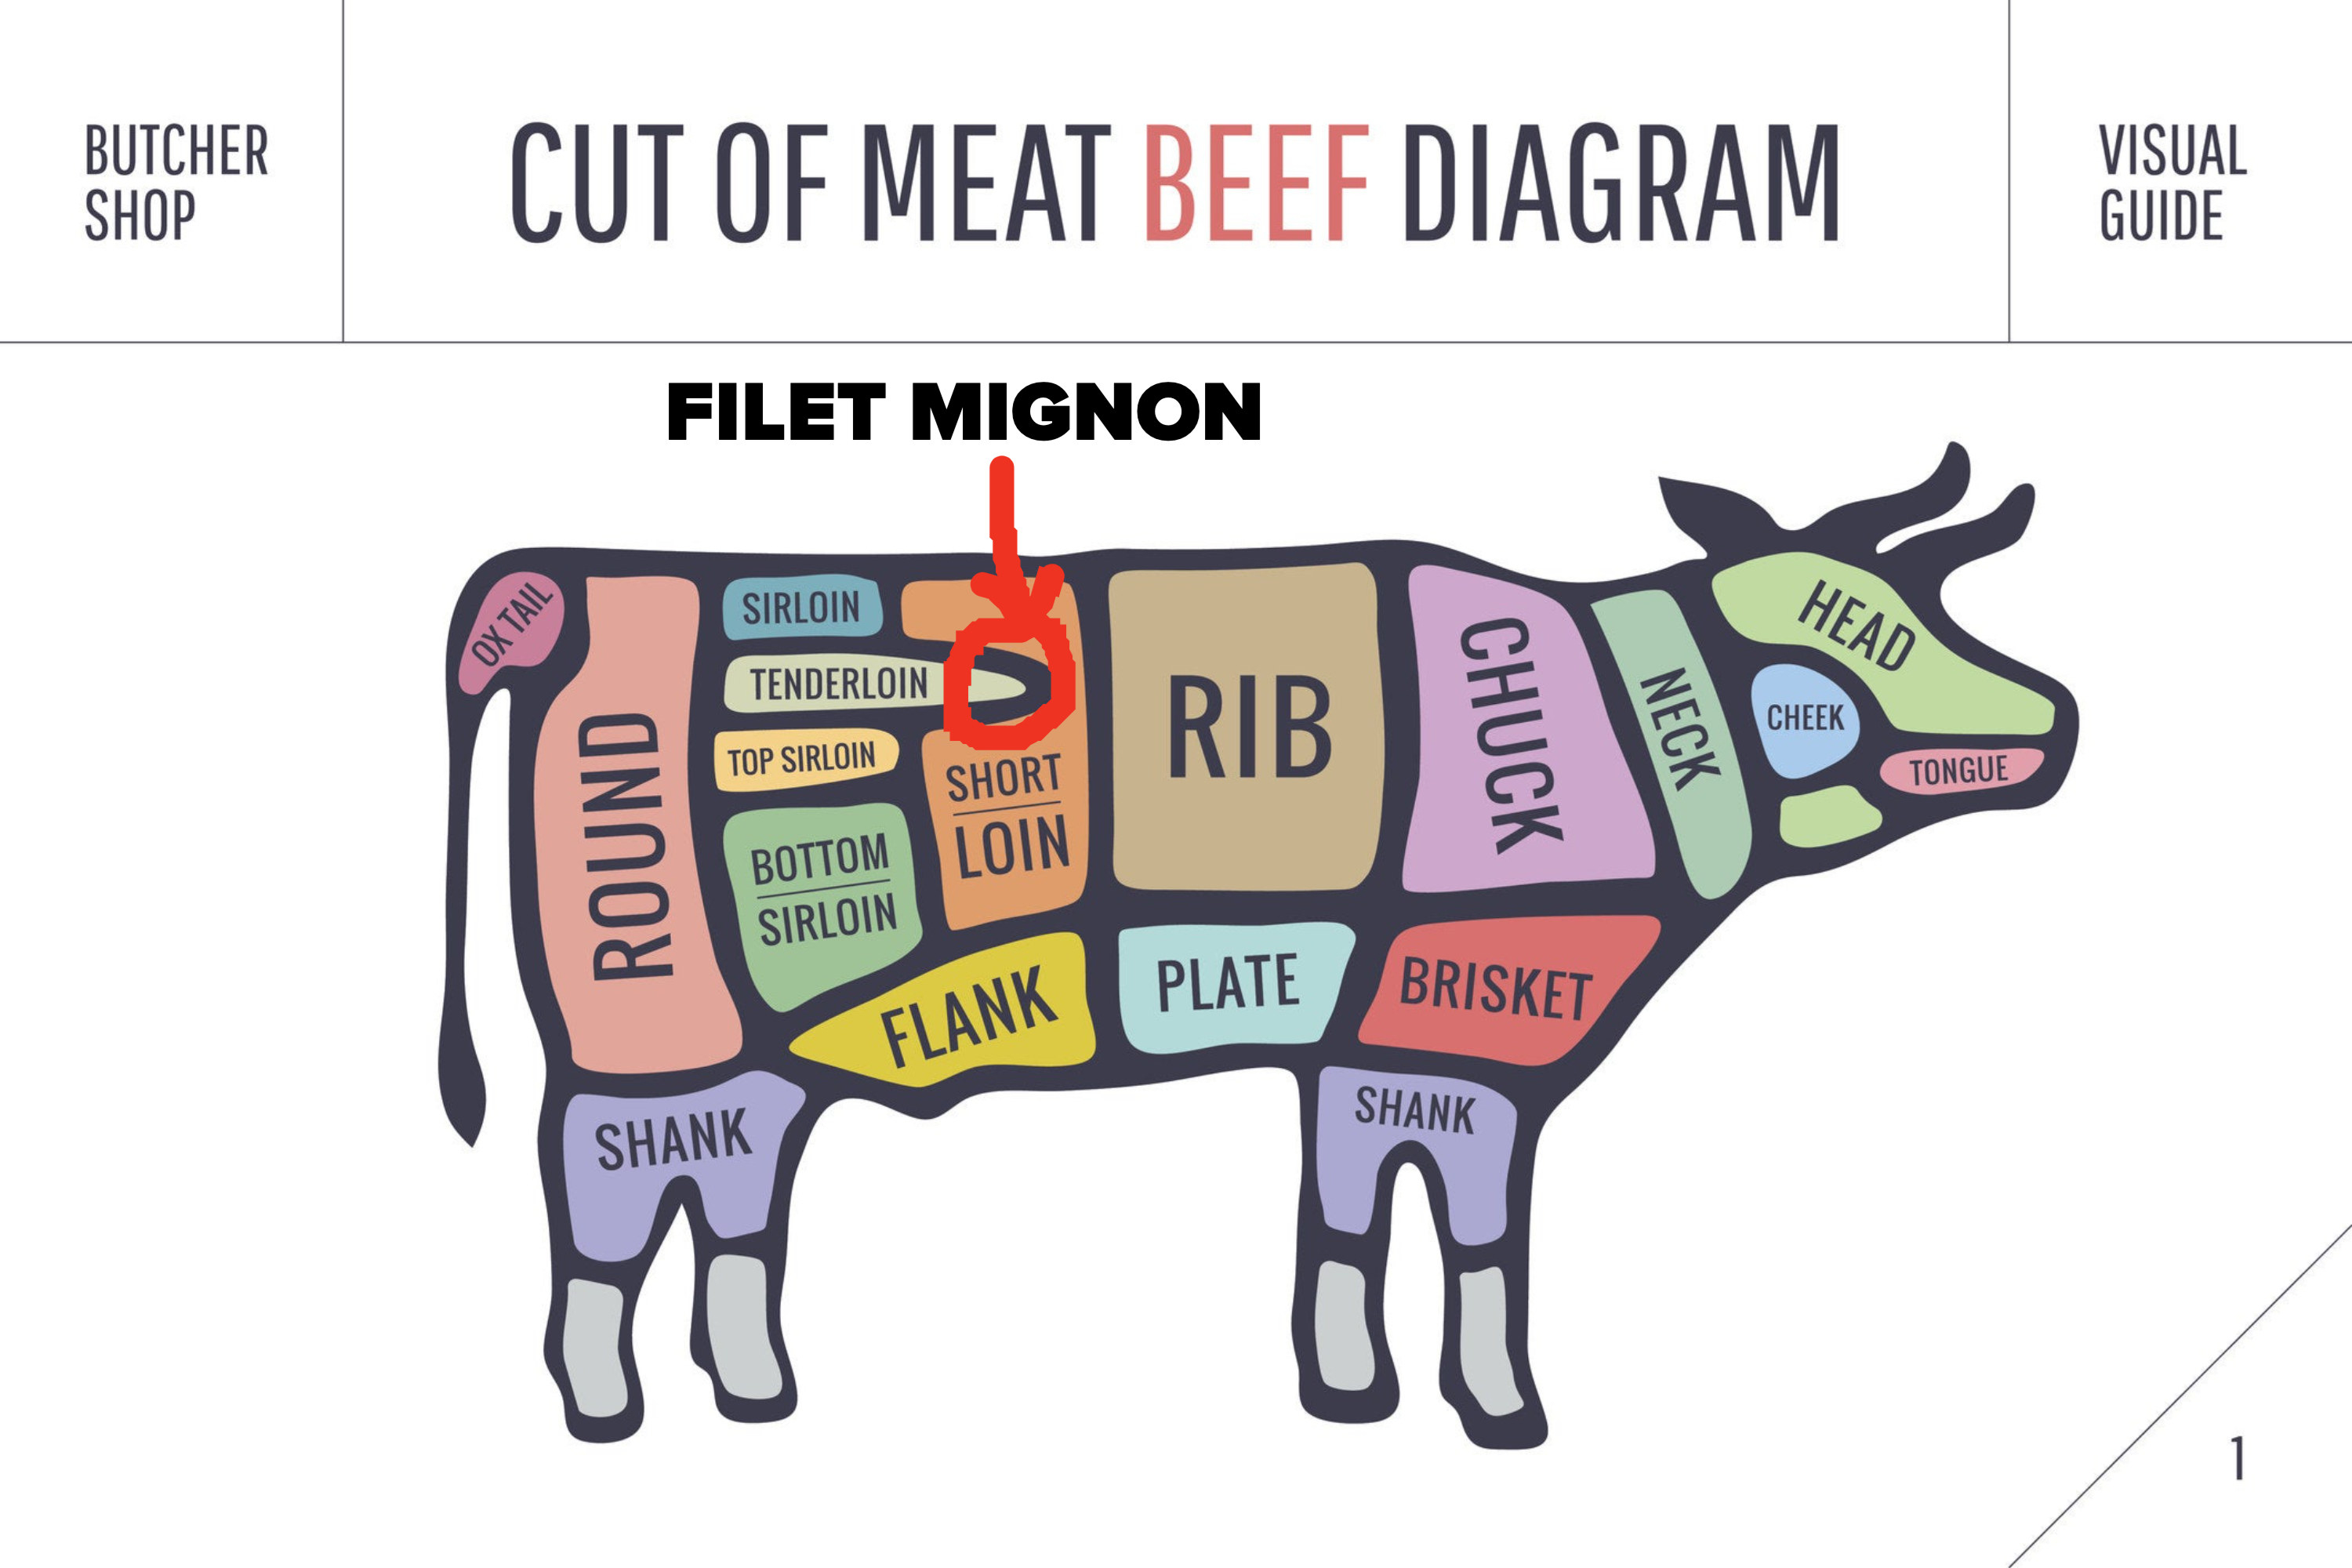 The diagram has filet mignon circled, which is toward the center of the cow